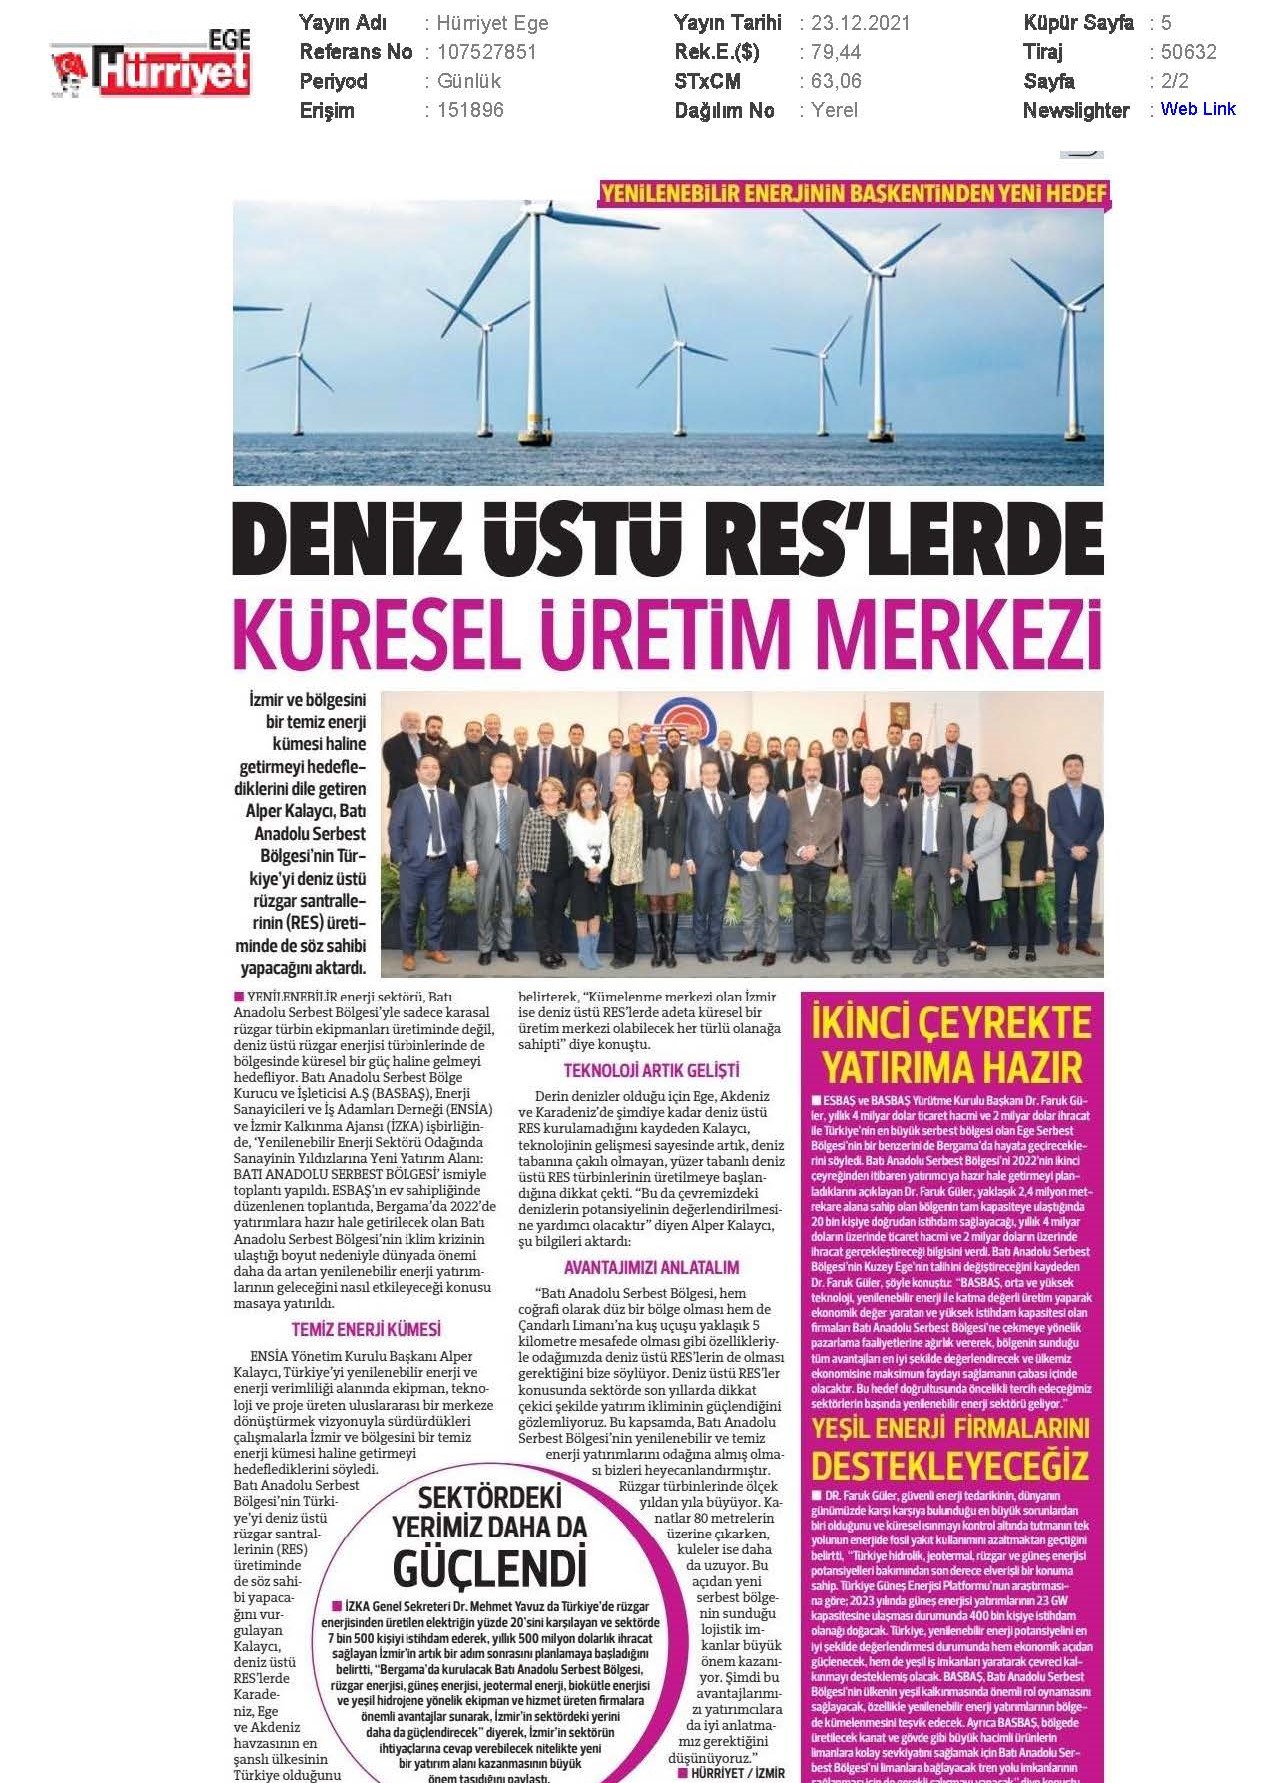 TURKEY TO BECOME A GLOBAL POWER IN THE WESTERN ANATOLIA FREE ZONE AND OFFSHORE WIND POWER PLANTS